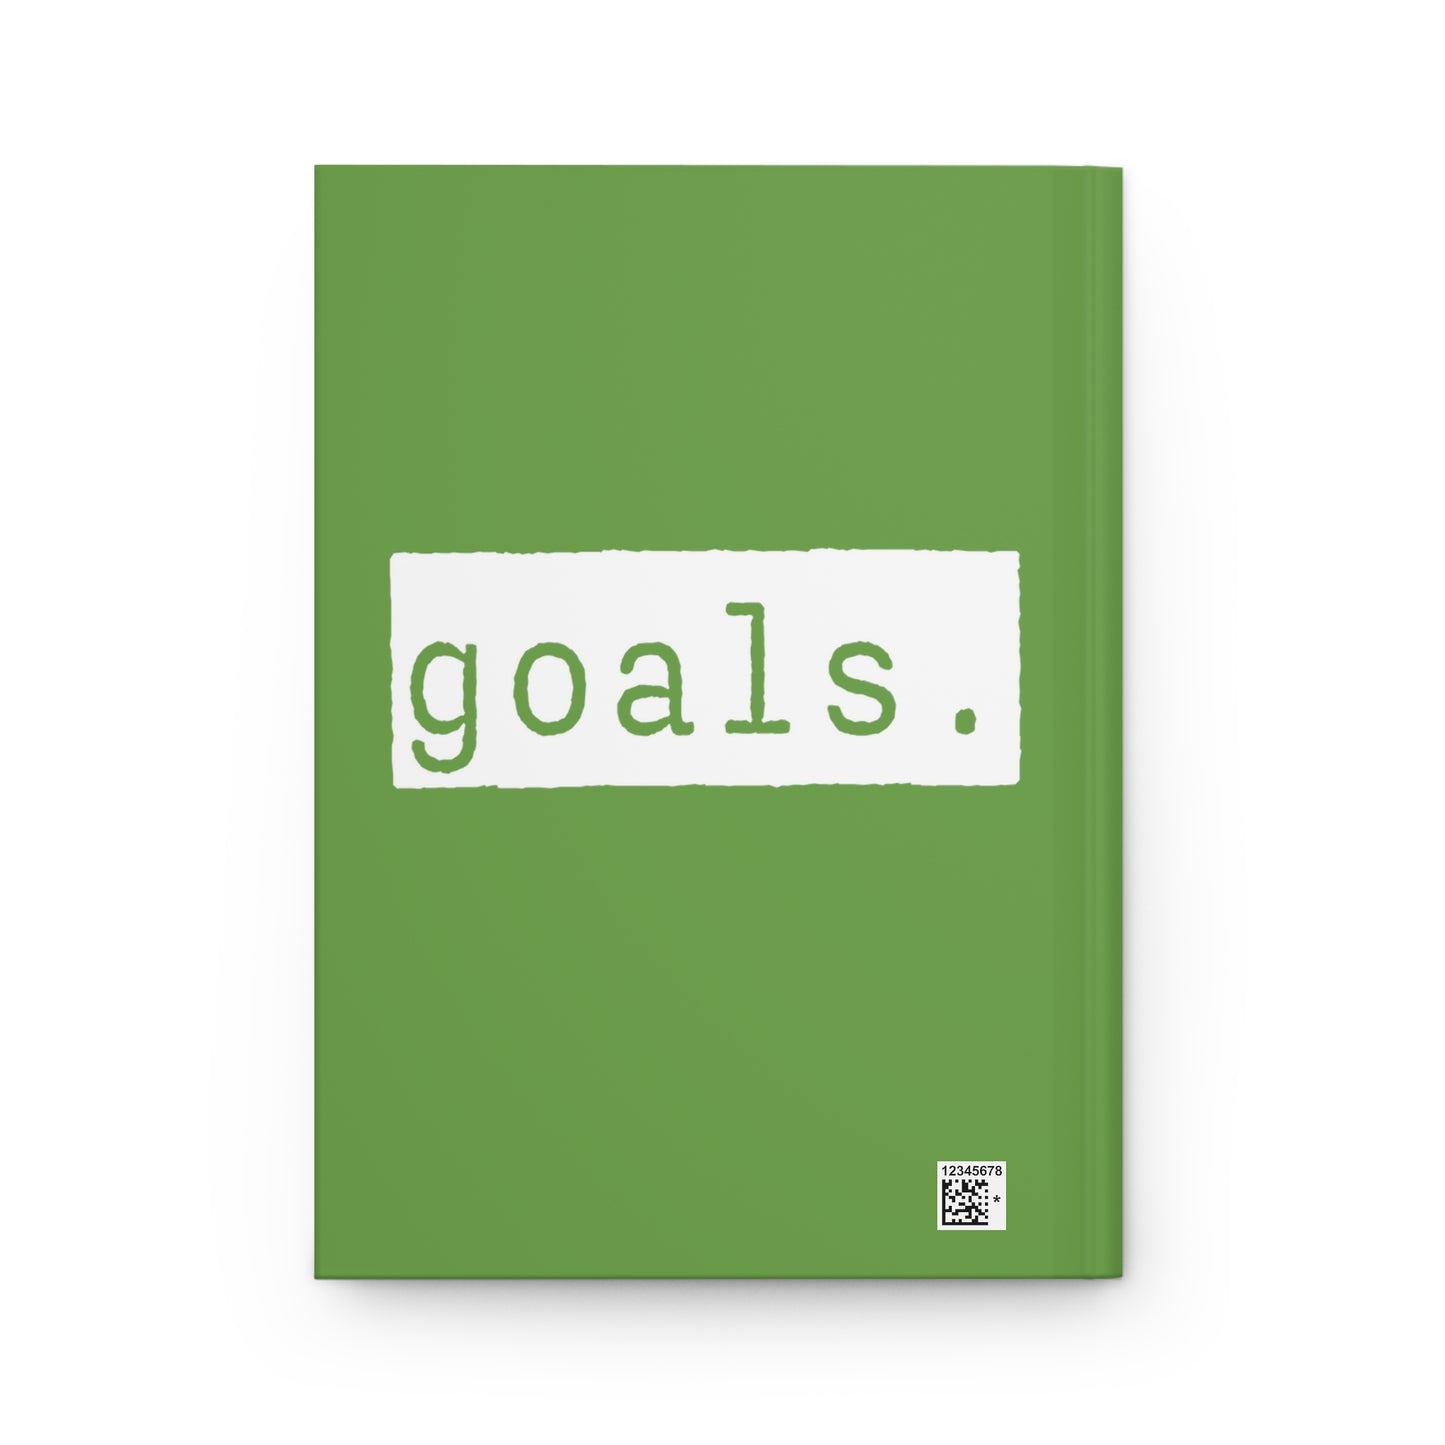 Goals Green Matte Hardcover Journal | Blank Book for Notes | Lined Notebook Diary Milestone Log